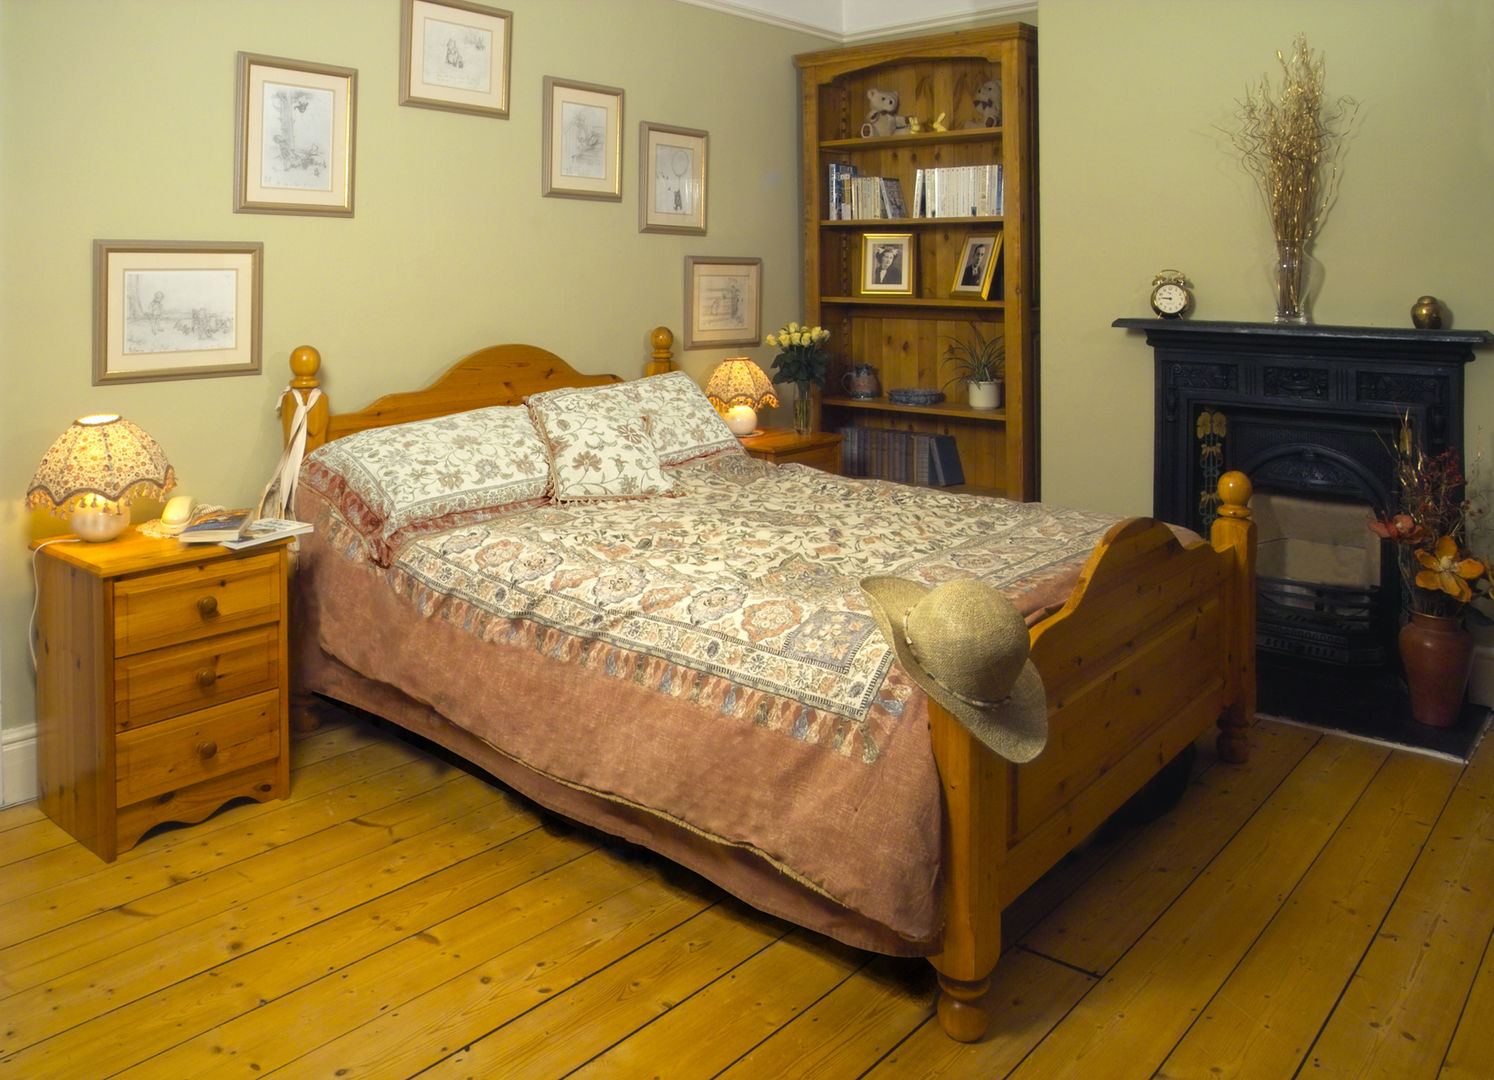 Country style bedroom design Style Within Dormitorios rústicos country bedroom,pine bedroom,stripped floorboards,ethnic bedroom,ethnic bed linen,green bedroom,bedroom decoration,pine bed,counrty look,rustic look